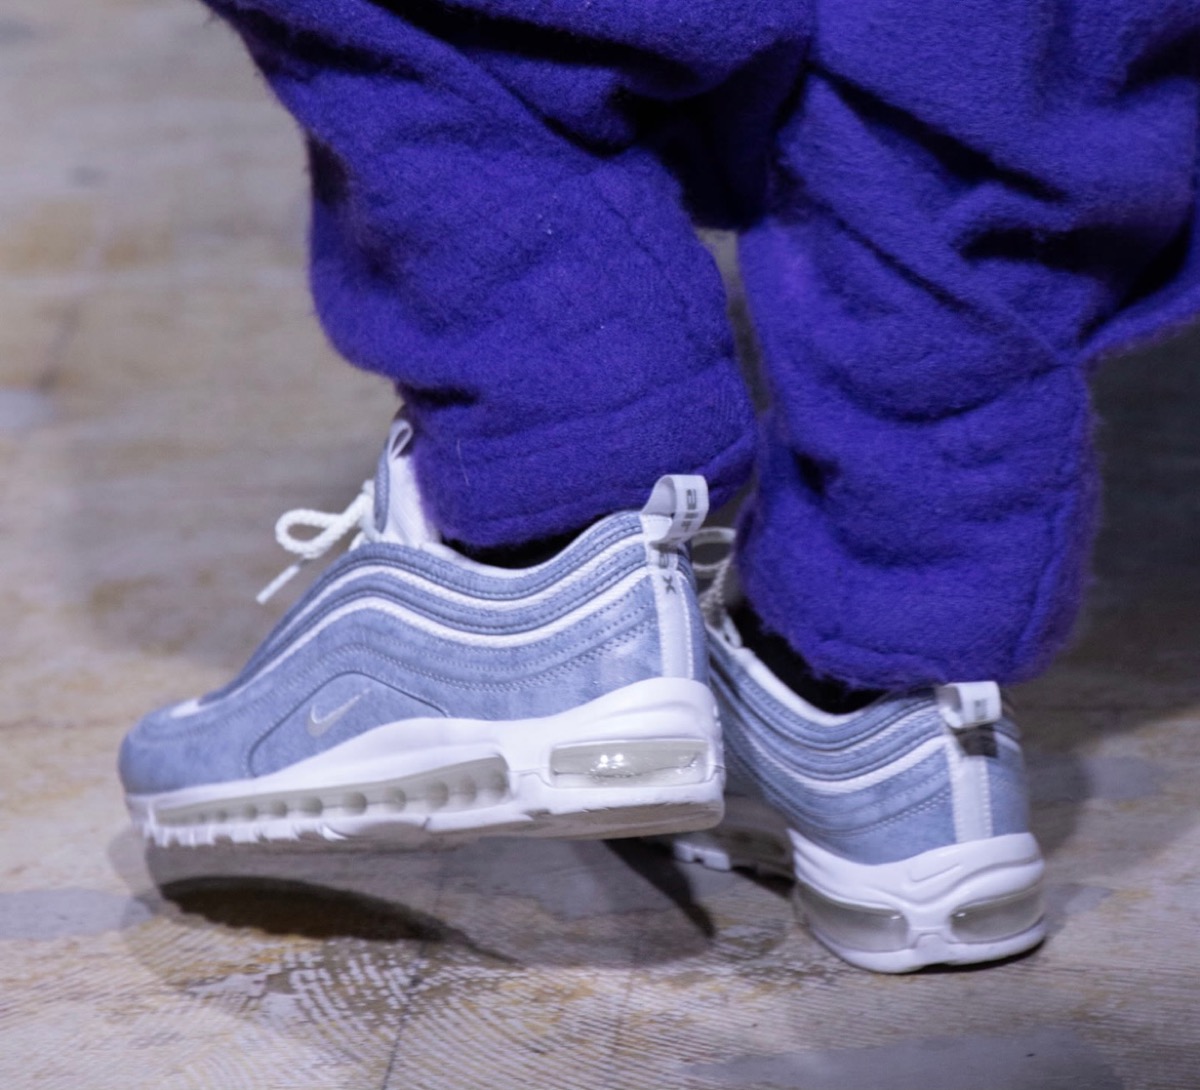 COMME des GARÇONS HOMME PLUS × Nike】Air Max 97が国内2022年秋冬に発売予定 | UP TO DATE